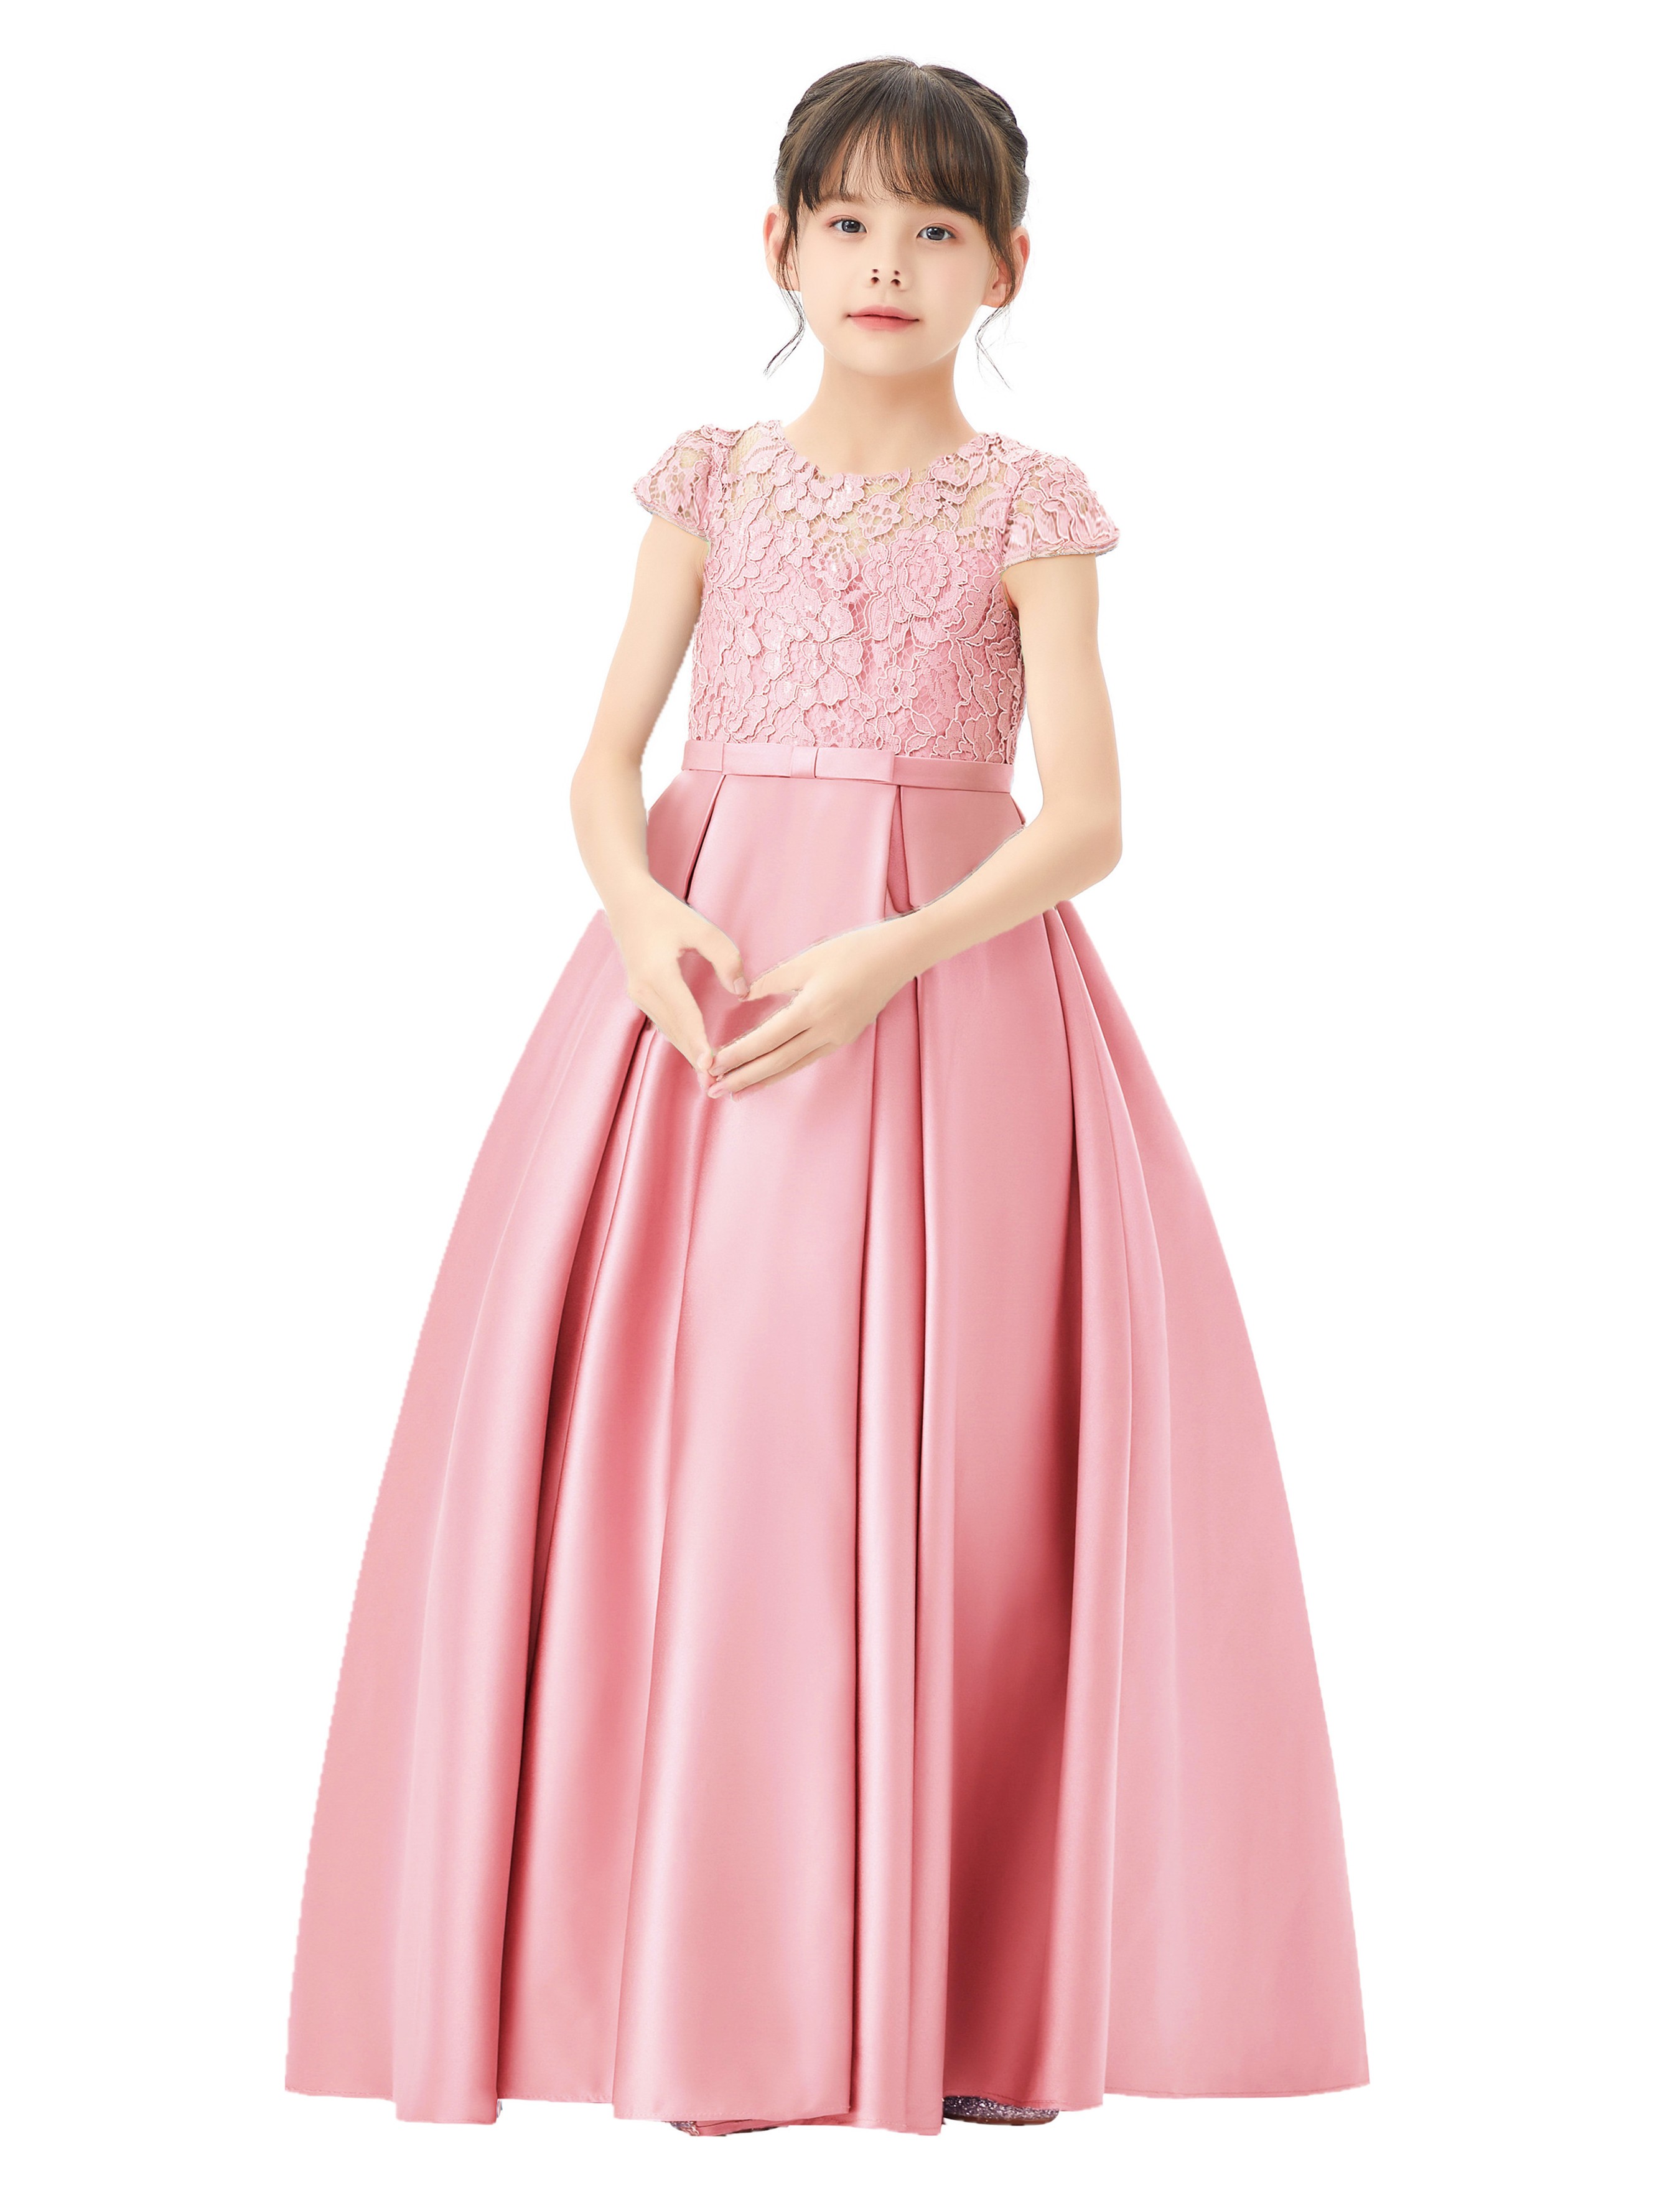 Dusty Rose Lace Flower Girl Dress Illusion Lace Dress Cap Sleeves L246